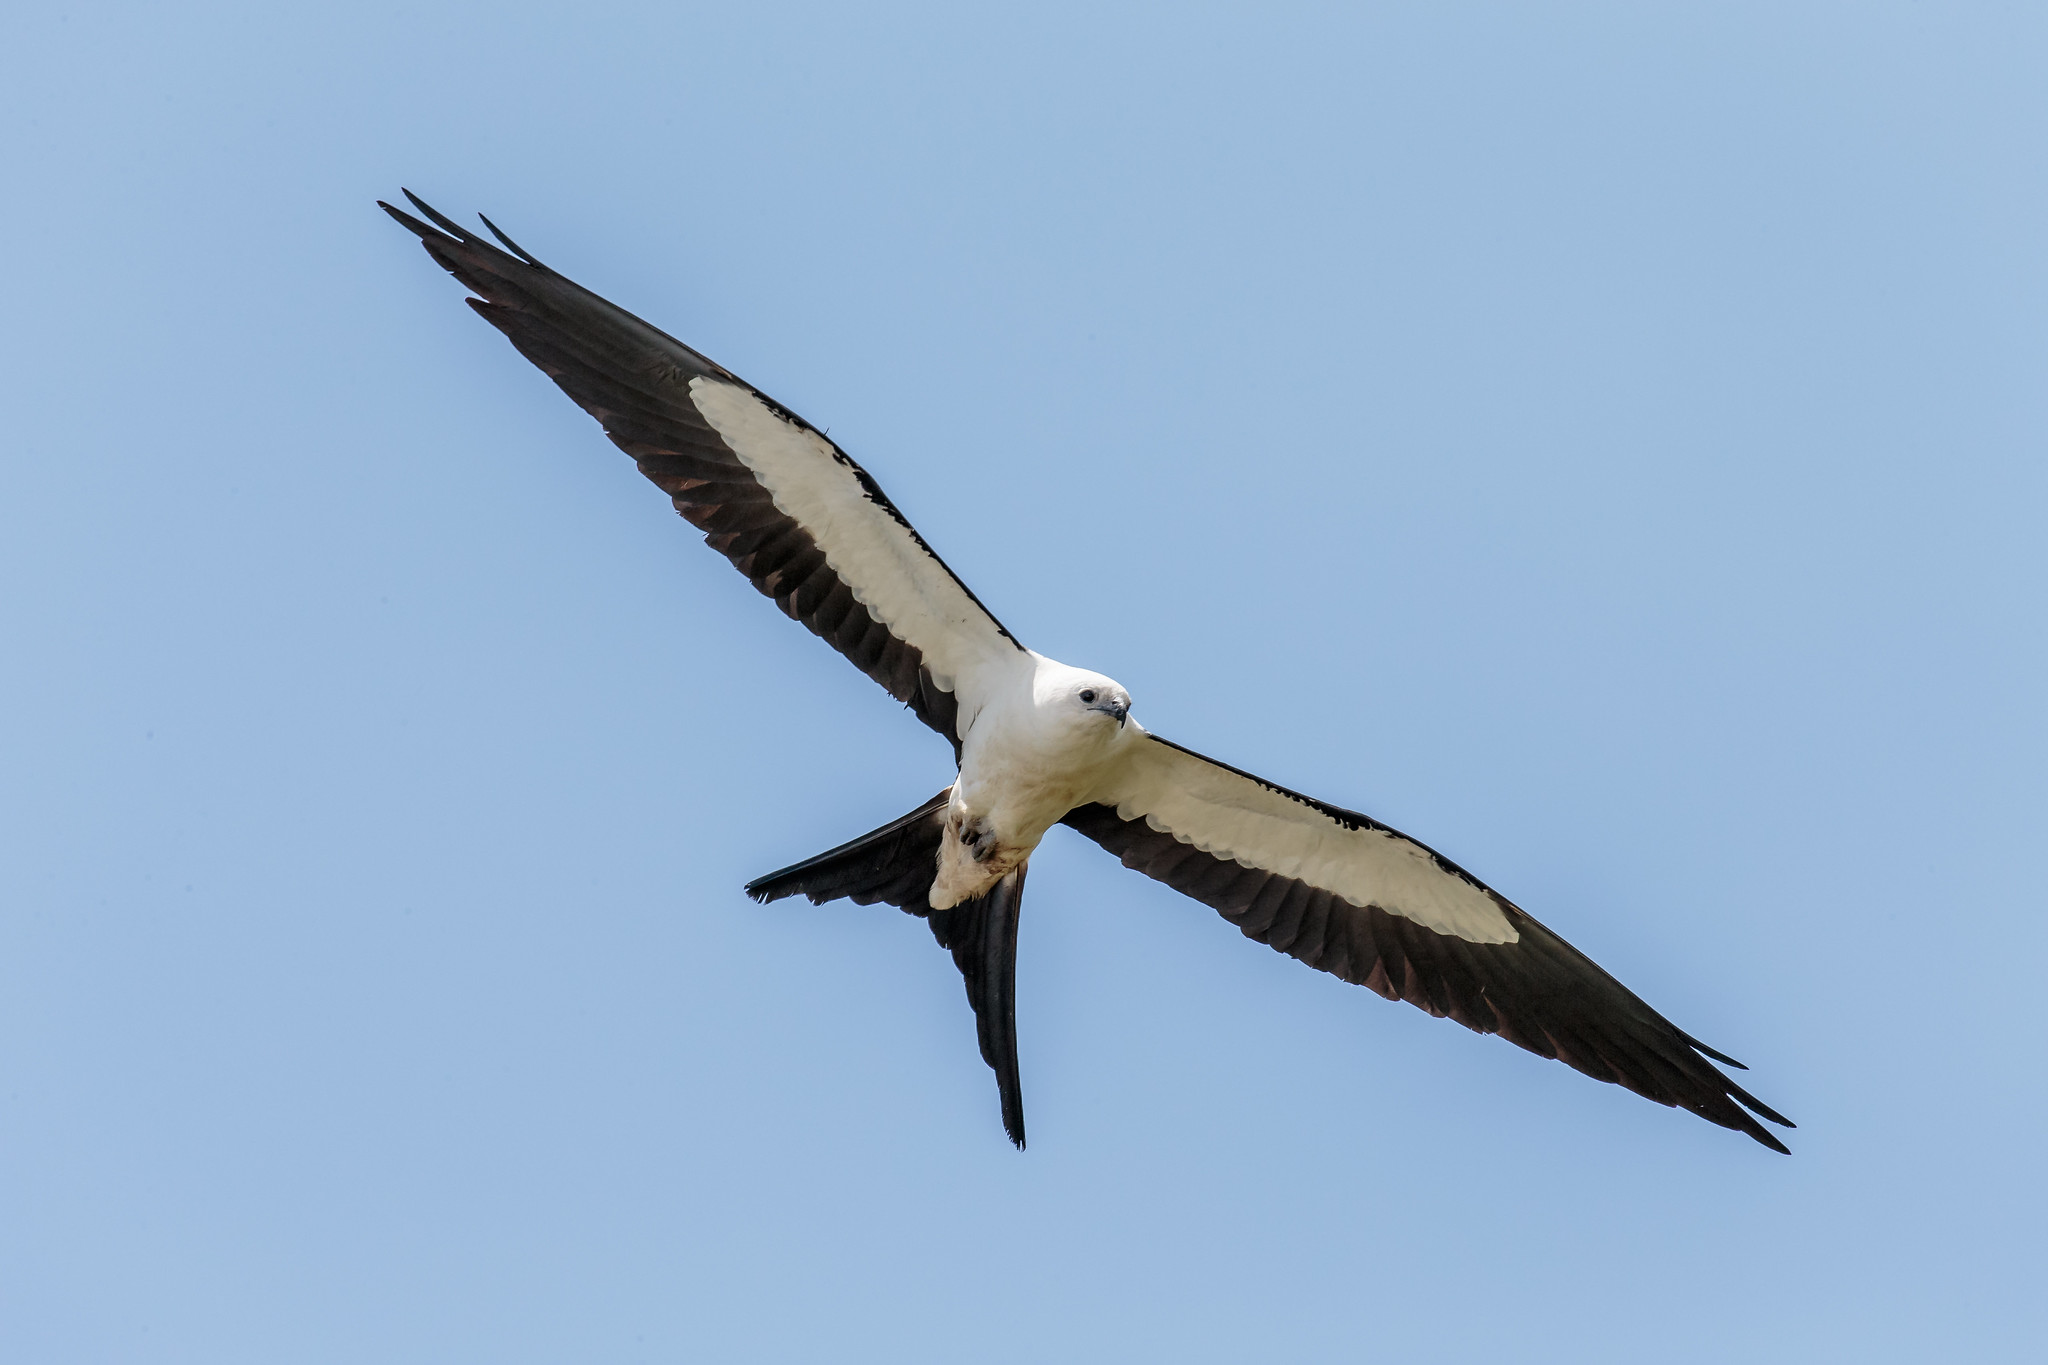 Swallow-tailed kite in flight.